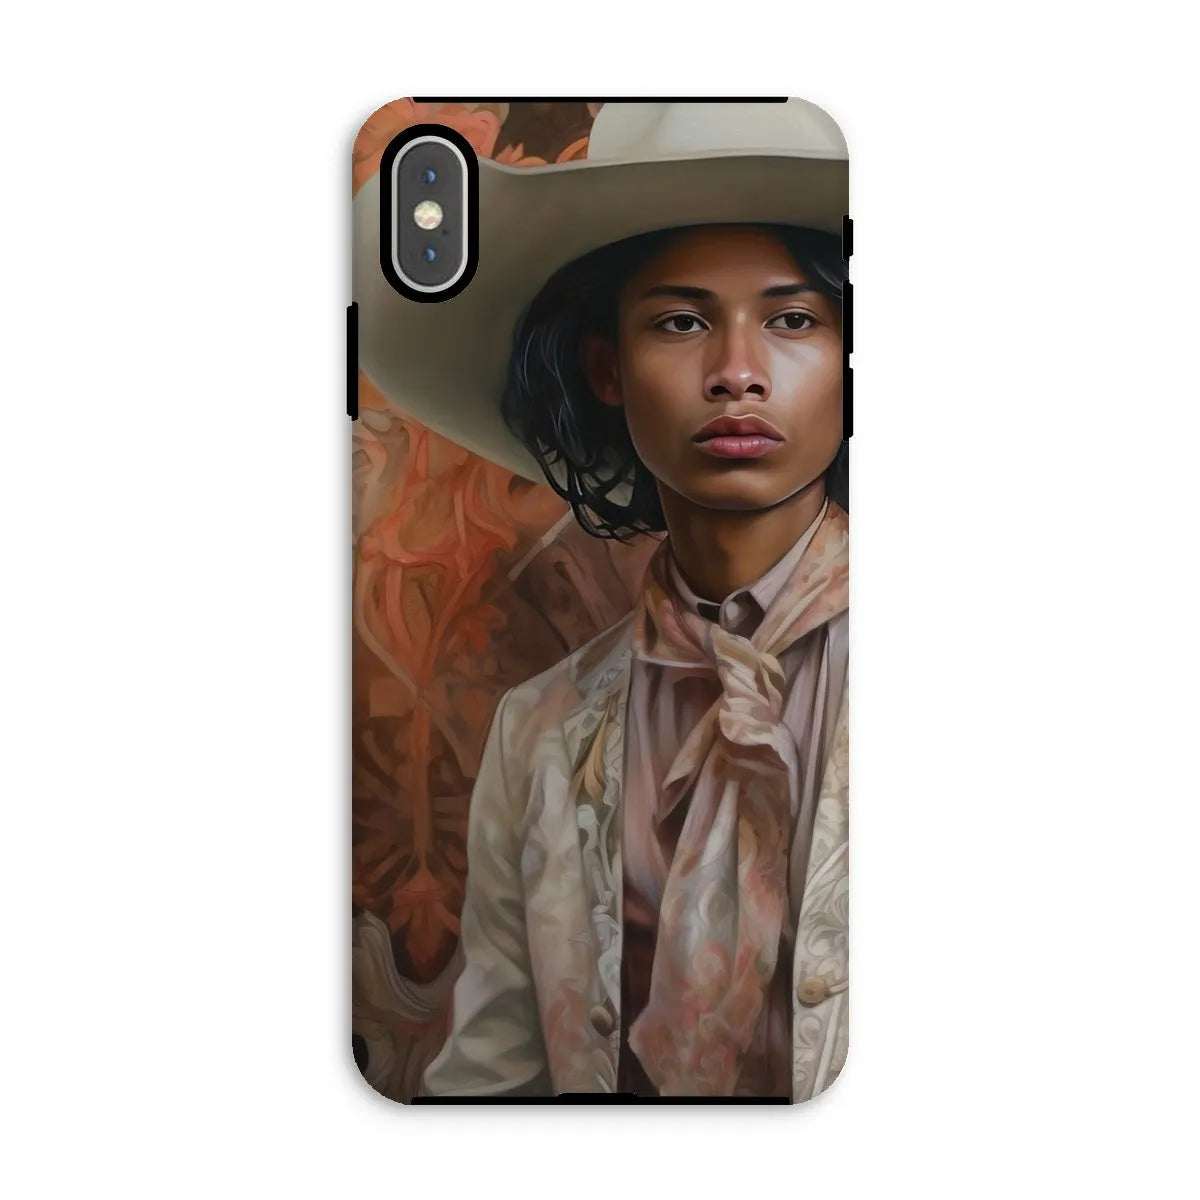 Arjuna The Gay Cowboy - Gay Aesthetic Art Phone Case - Iphone Xs Max / Matte - Mobile Phone Cases - Aesthetic Art